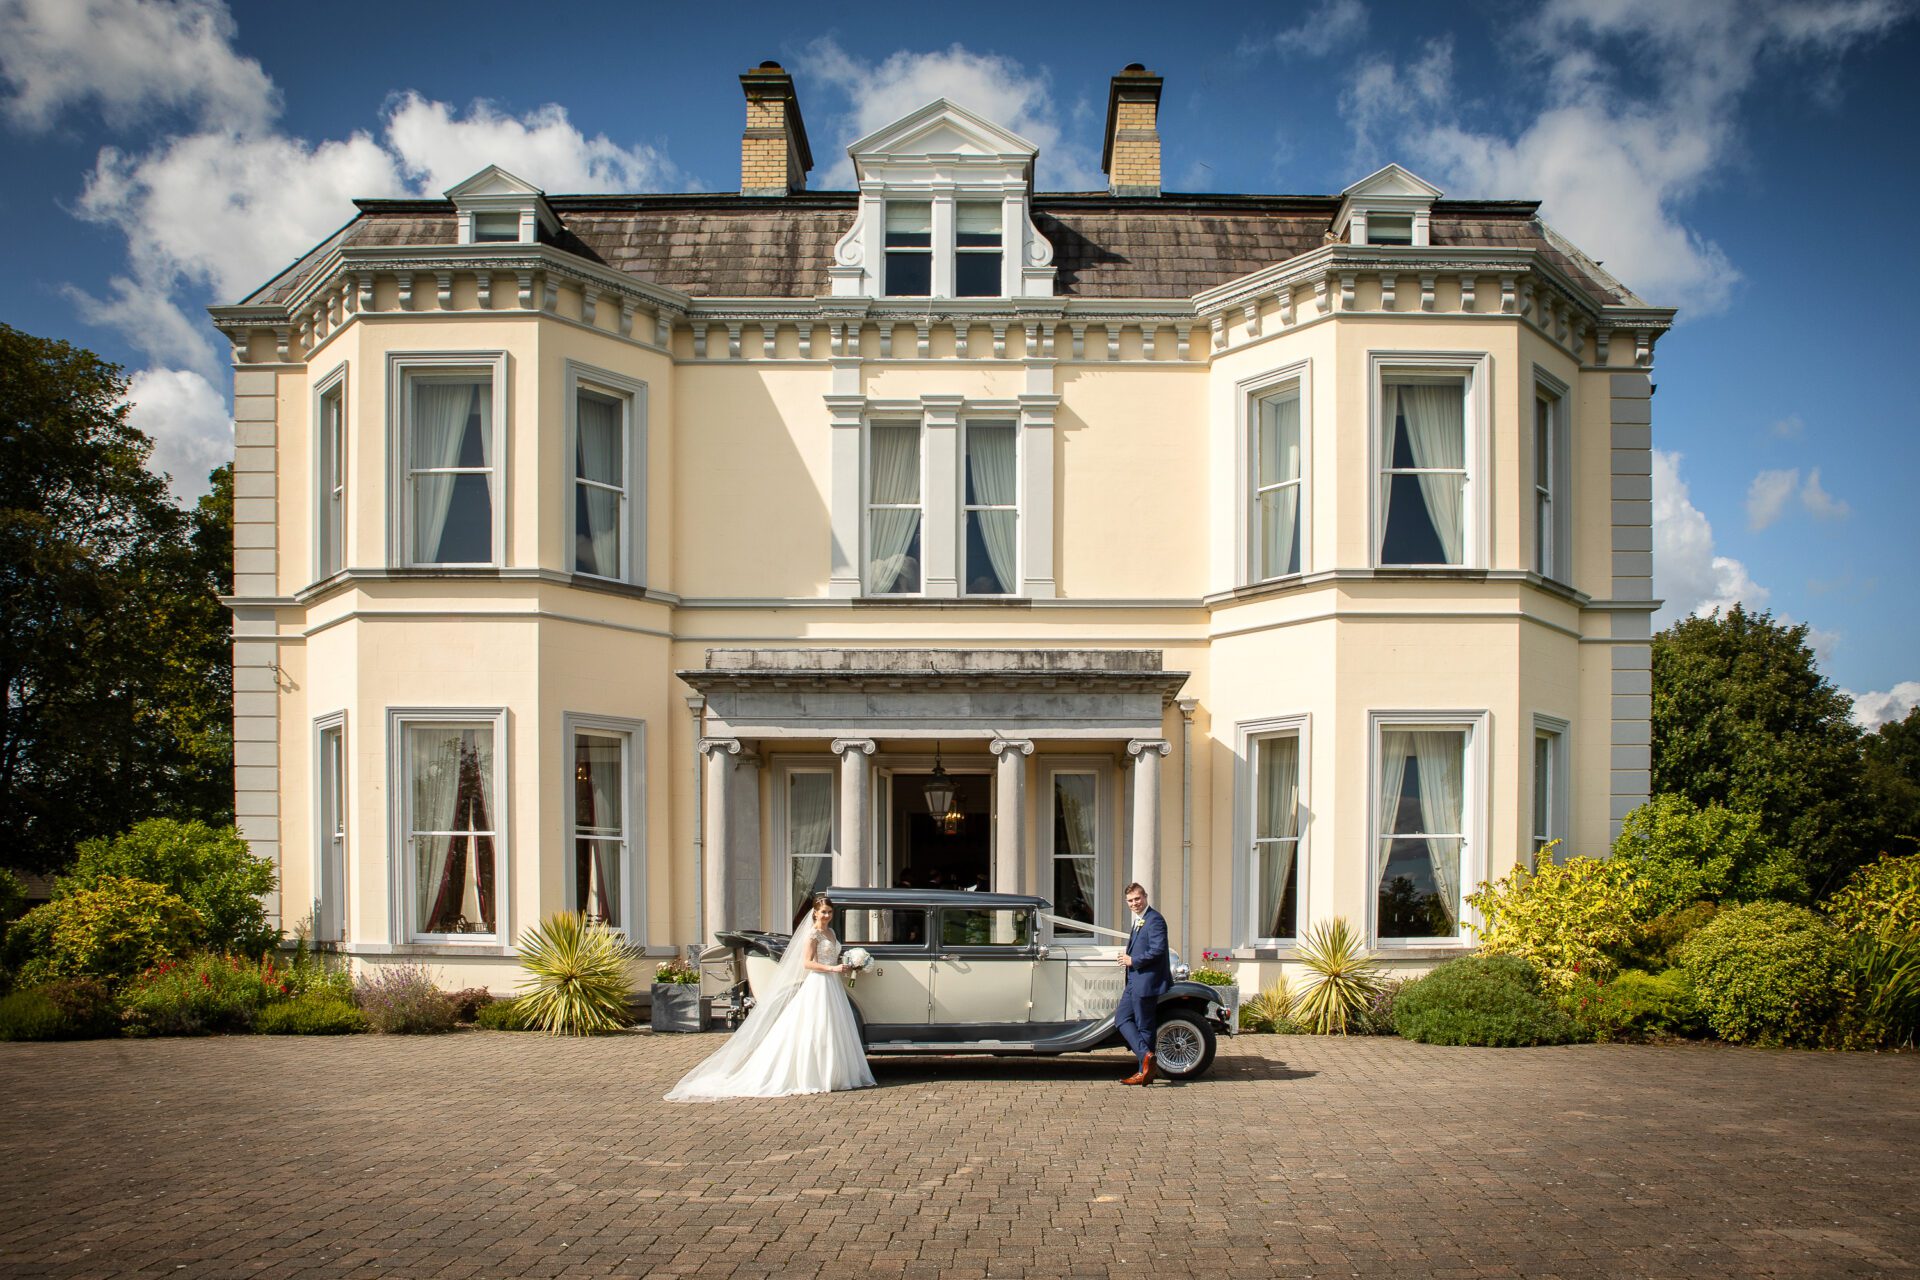 A bride and groom stand by a vintage car in front of an elegant, large house with lush greenery under a clear blue sky. the groom is holding the car door open for the bride.